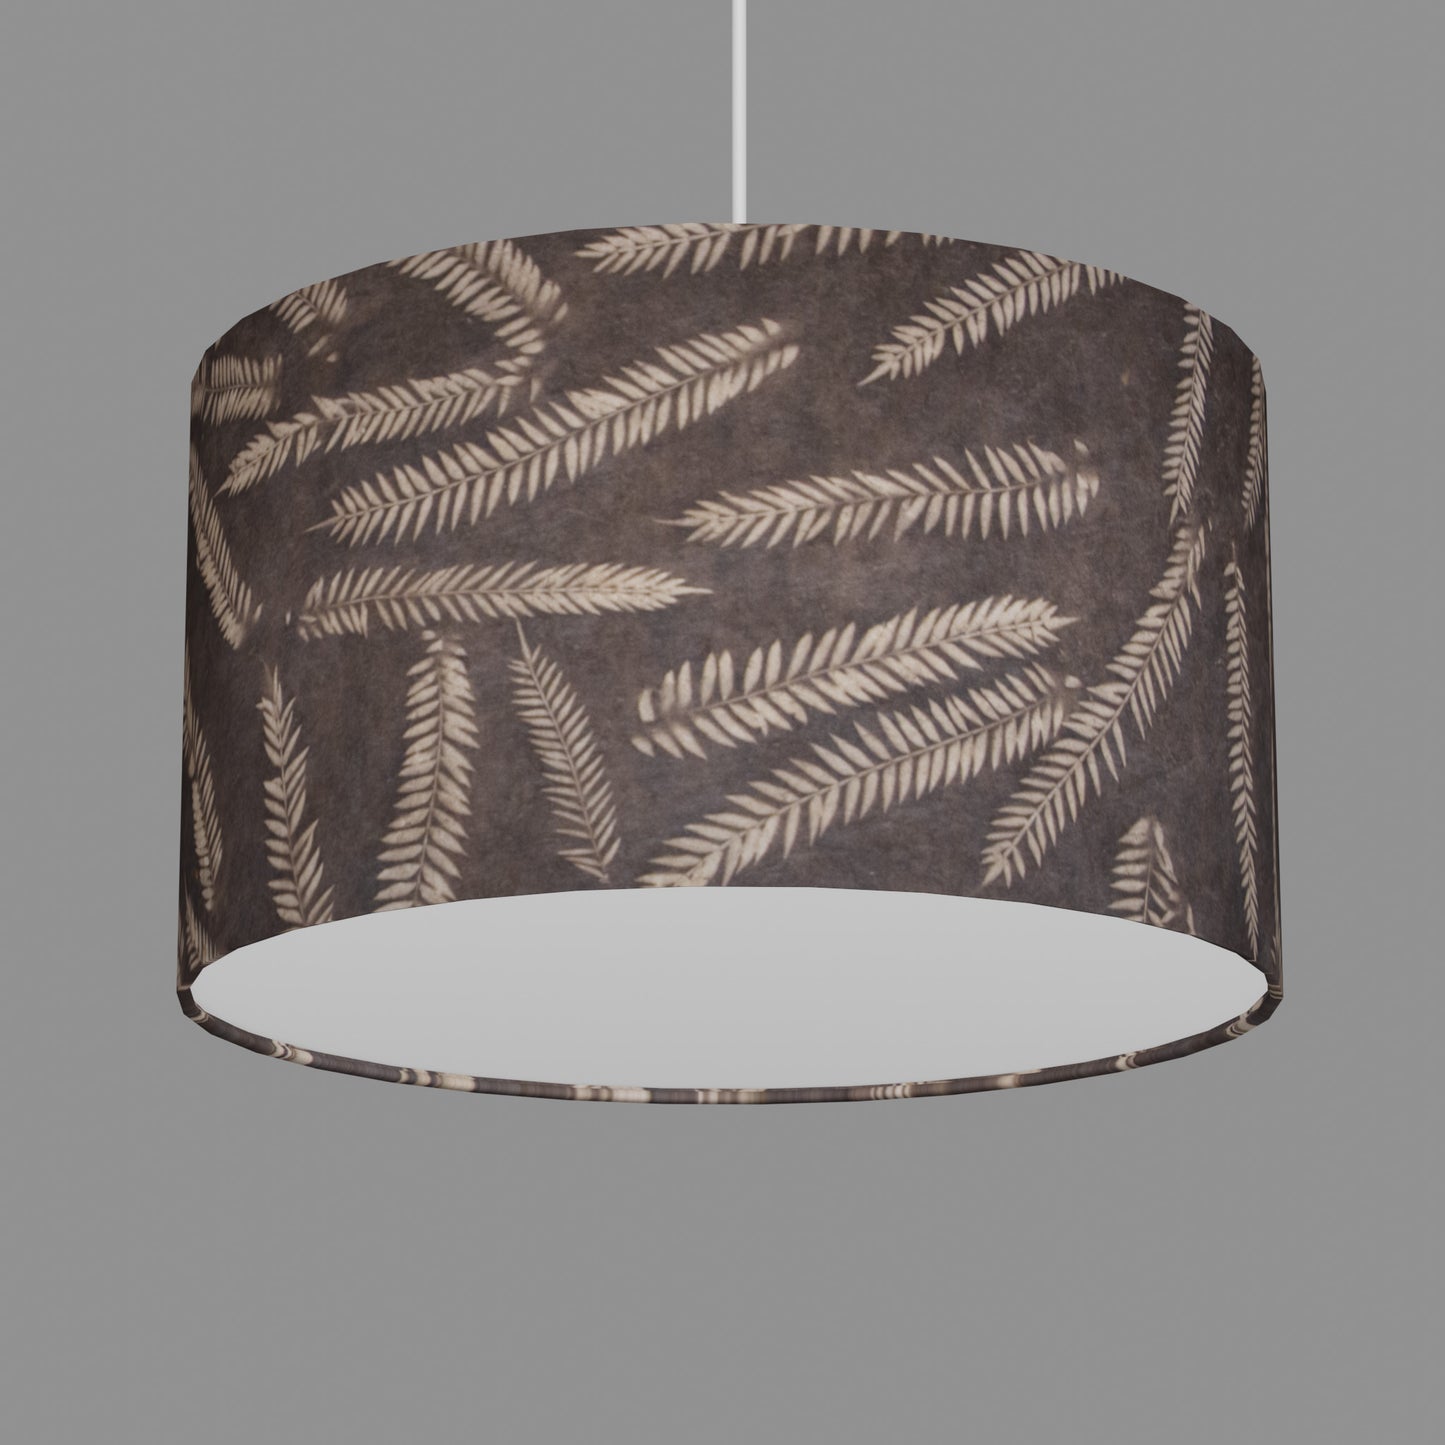 Drum Lamp Shade - P26 - Resistance Dyed Brown Fern, 35cm(d) x 20cm(h)